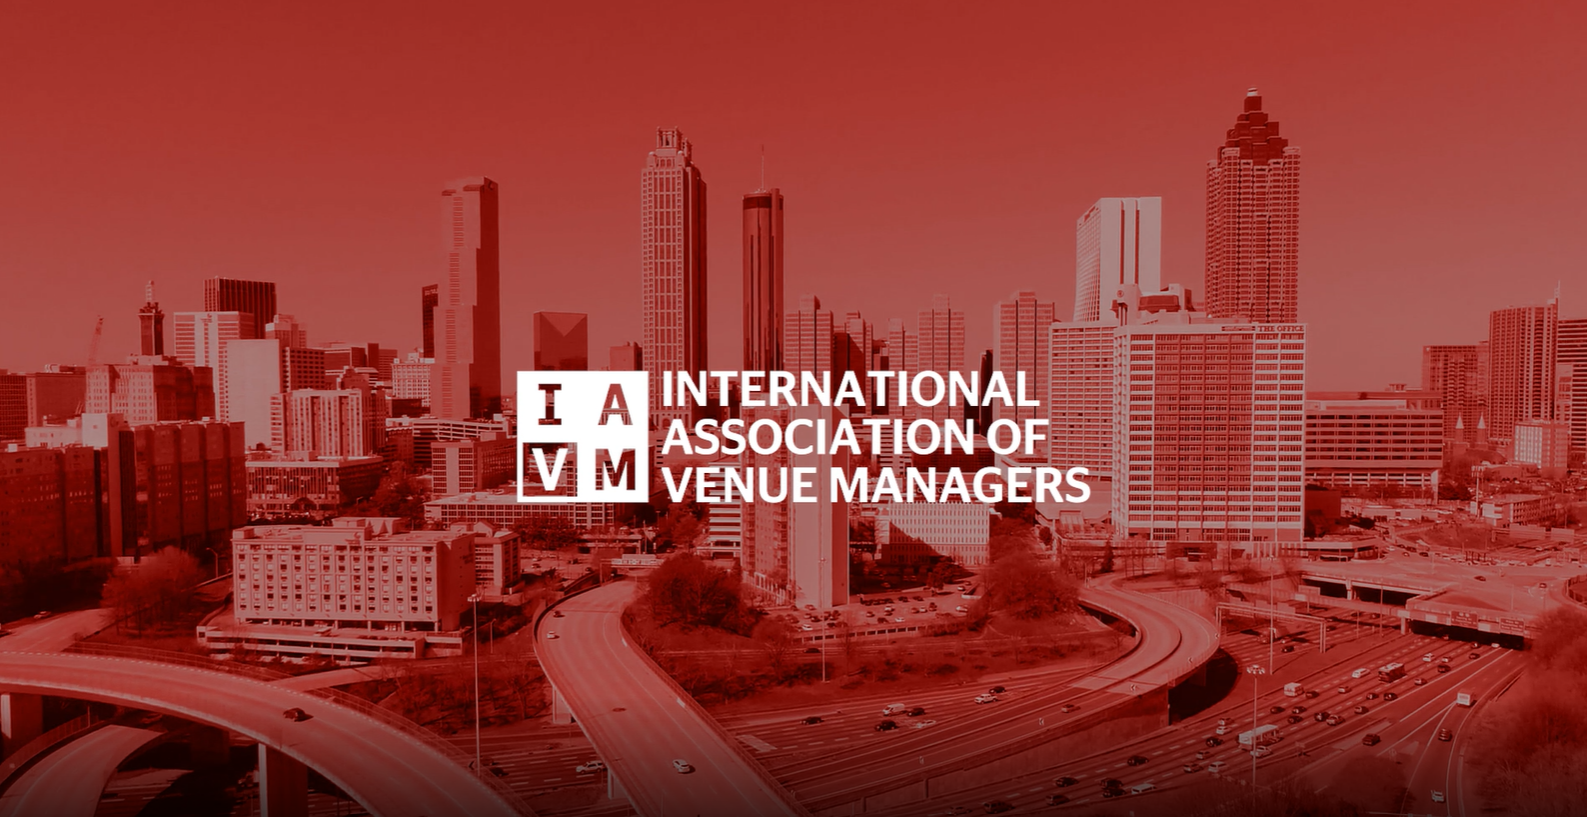 International Association of Venue Managers Delaware North